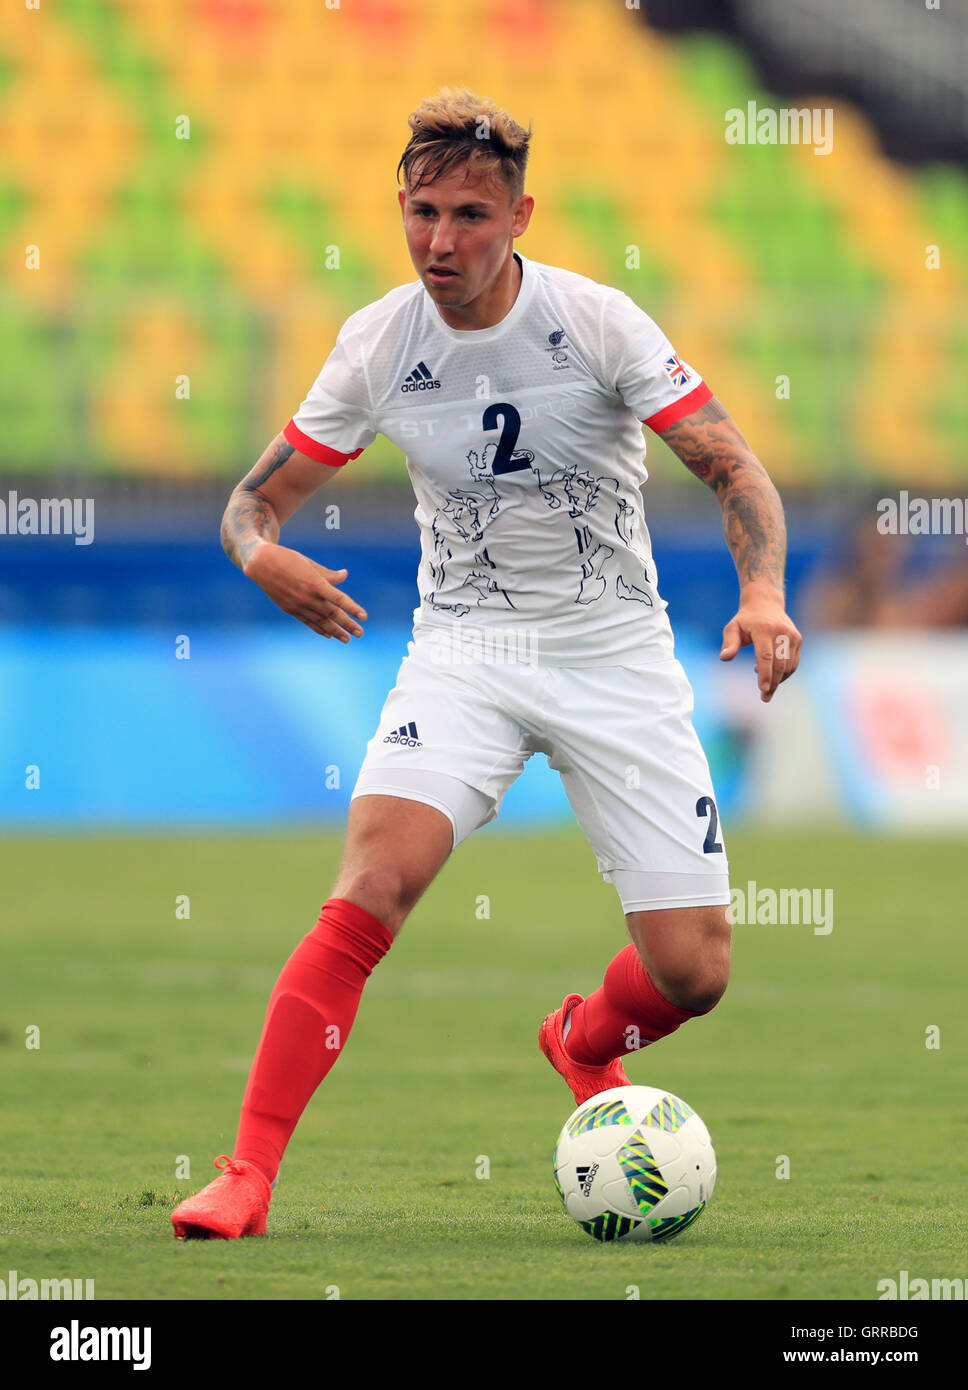 Great Britain's Liam Irons during the Men's 7 a side Football at the Deodoro Stadium during the first day of the 2016 Rio Paralympic Games in Rio de Janeiro, Brazil. Stock Photo